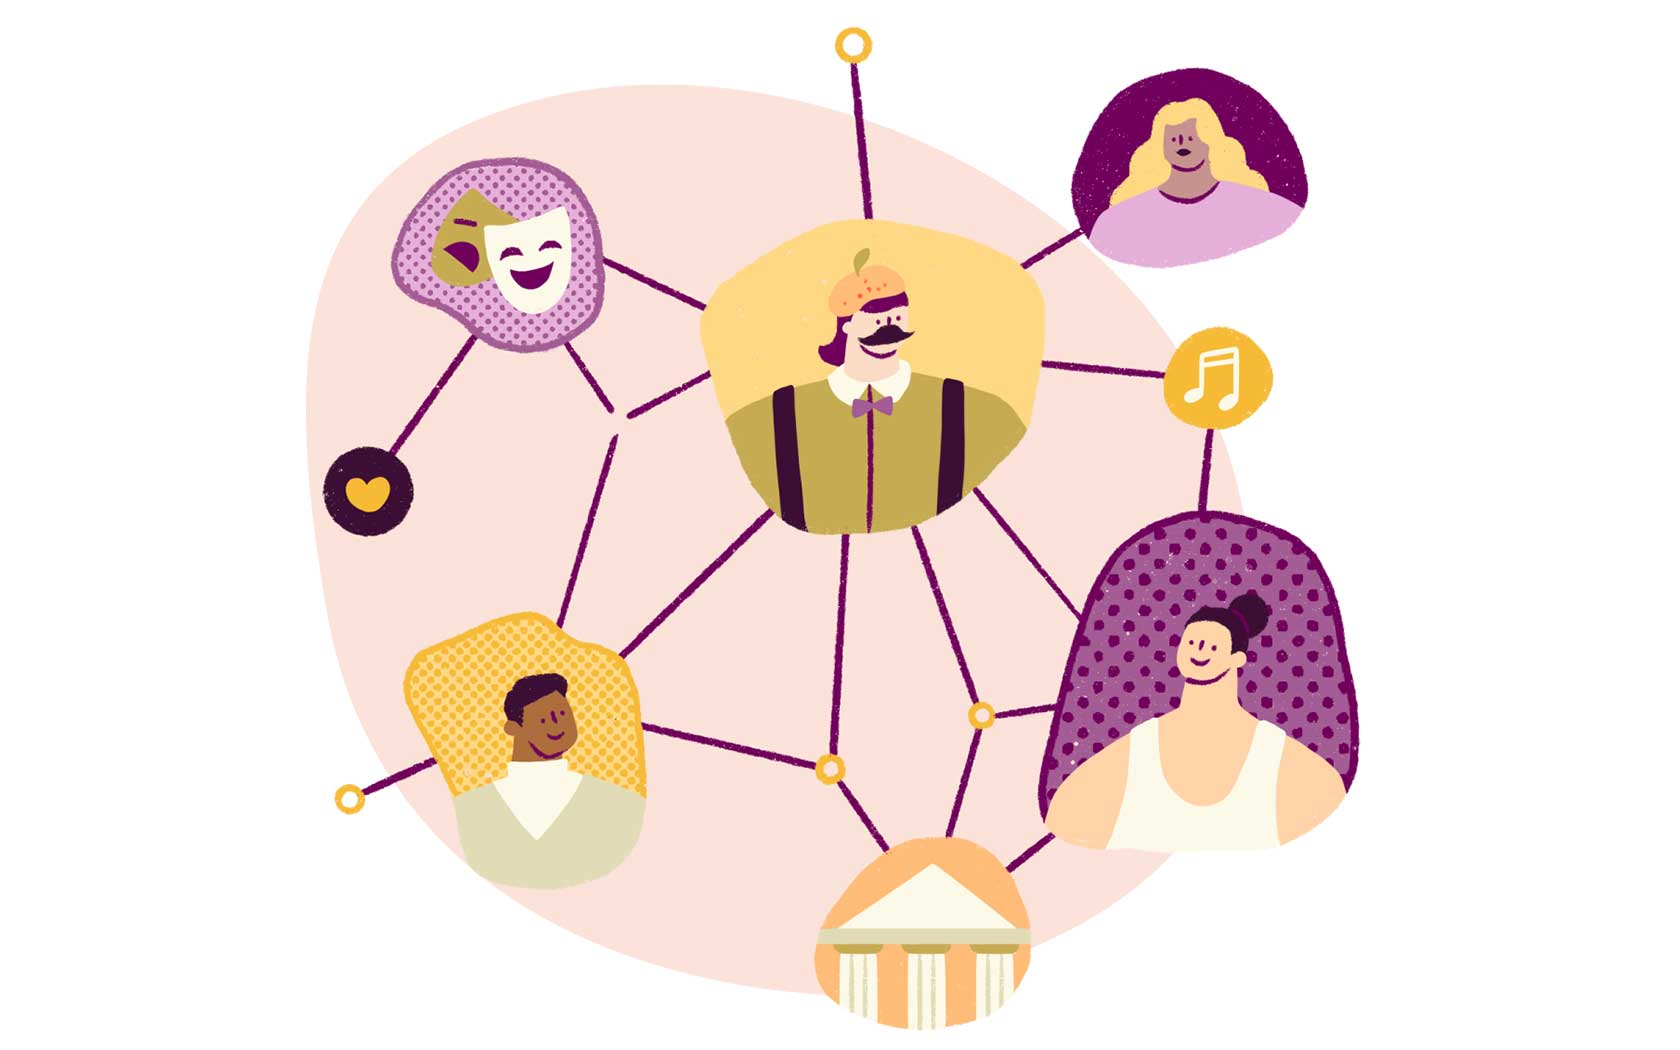 Illustration of a network among stakeholders in the arts and entertainment industry.